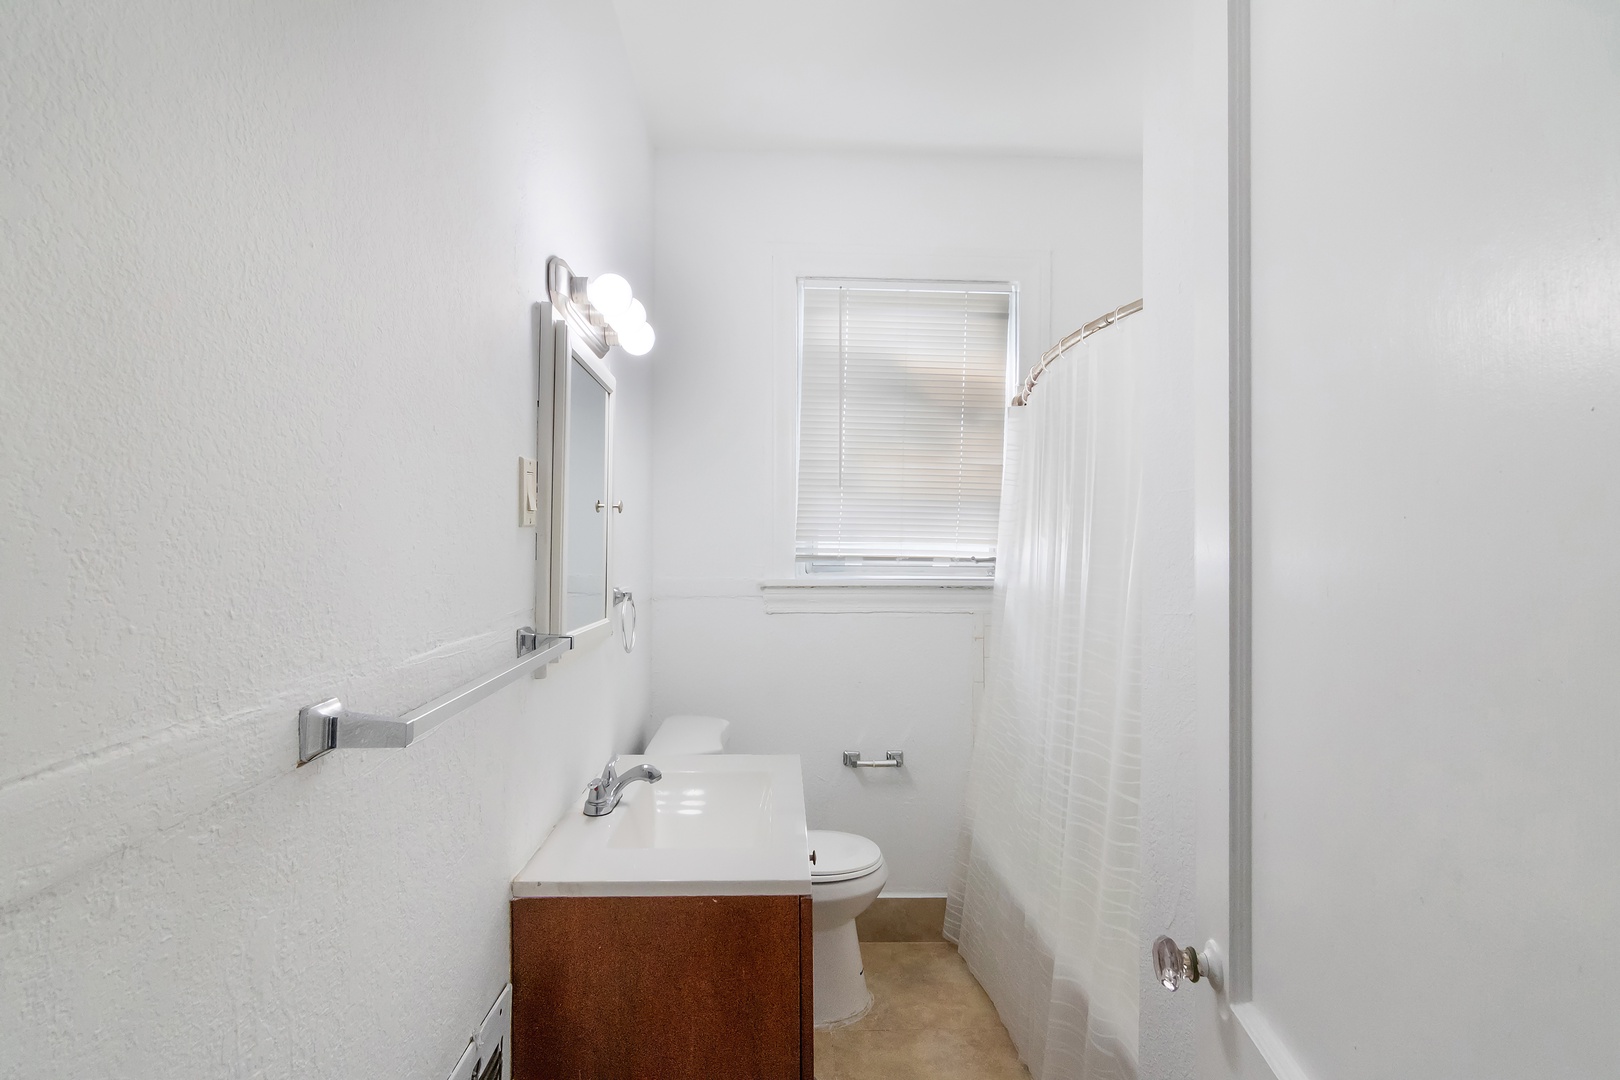 A comfortable Bathroom offering a Single Vanity and Shower/Tub Combo